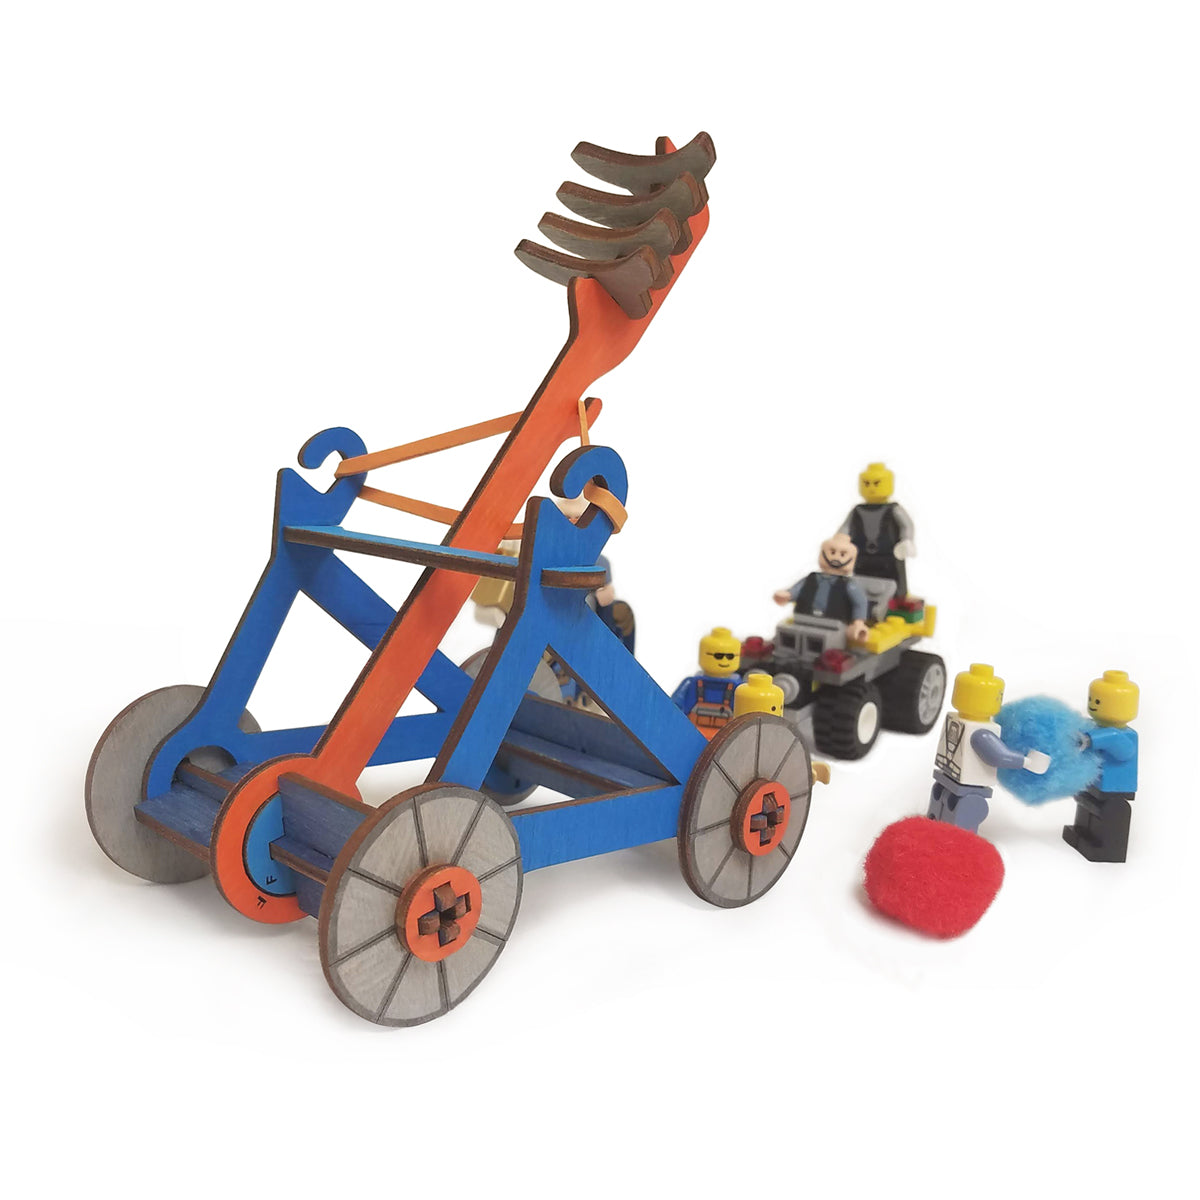 catapult 1 with lego figures for scale